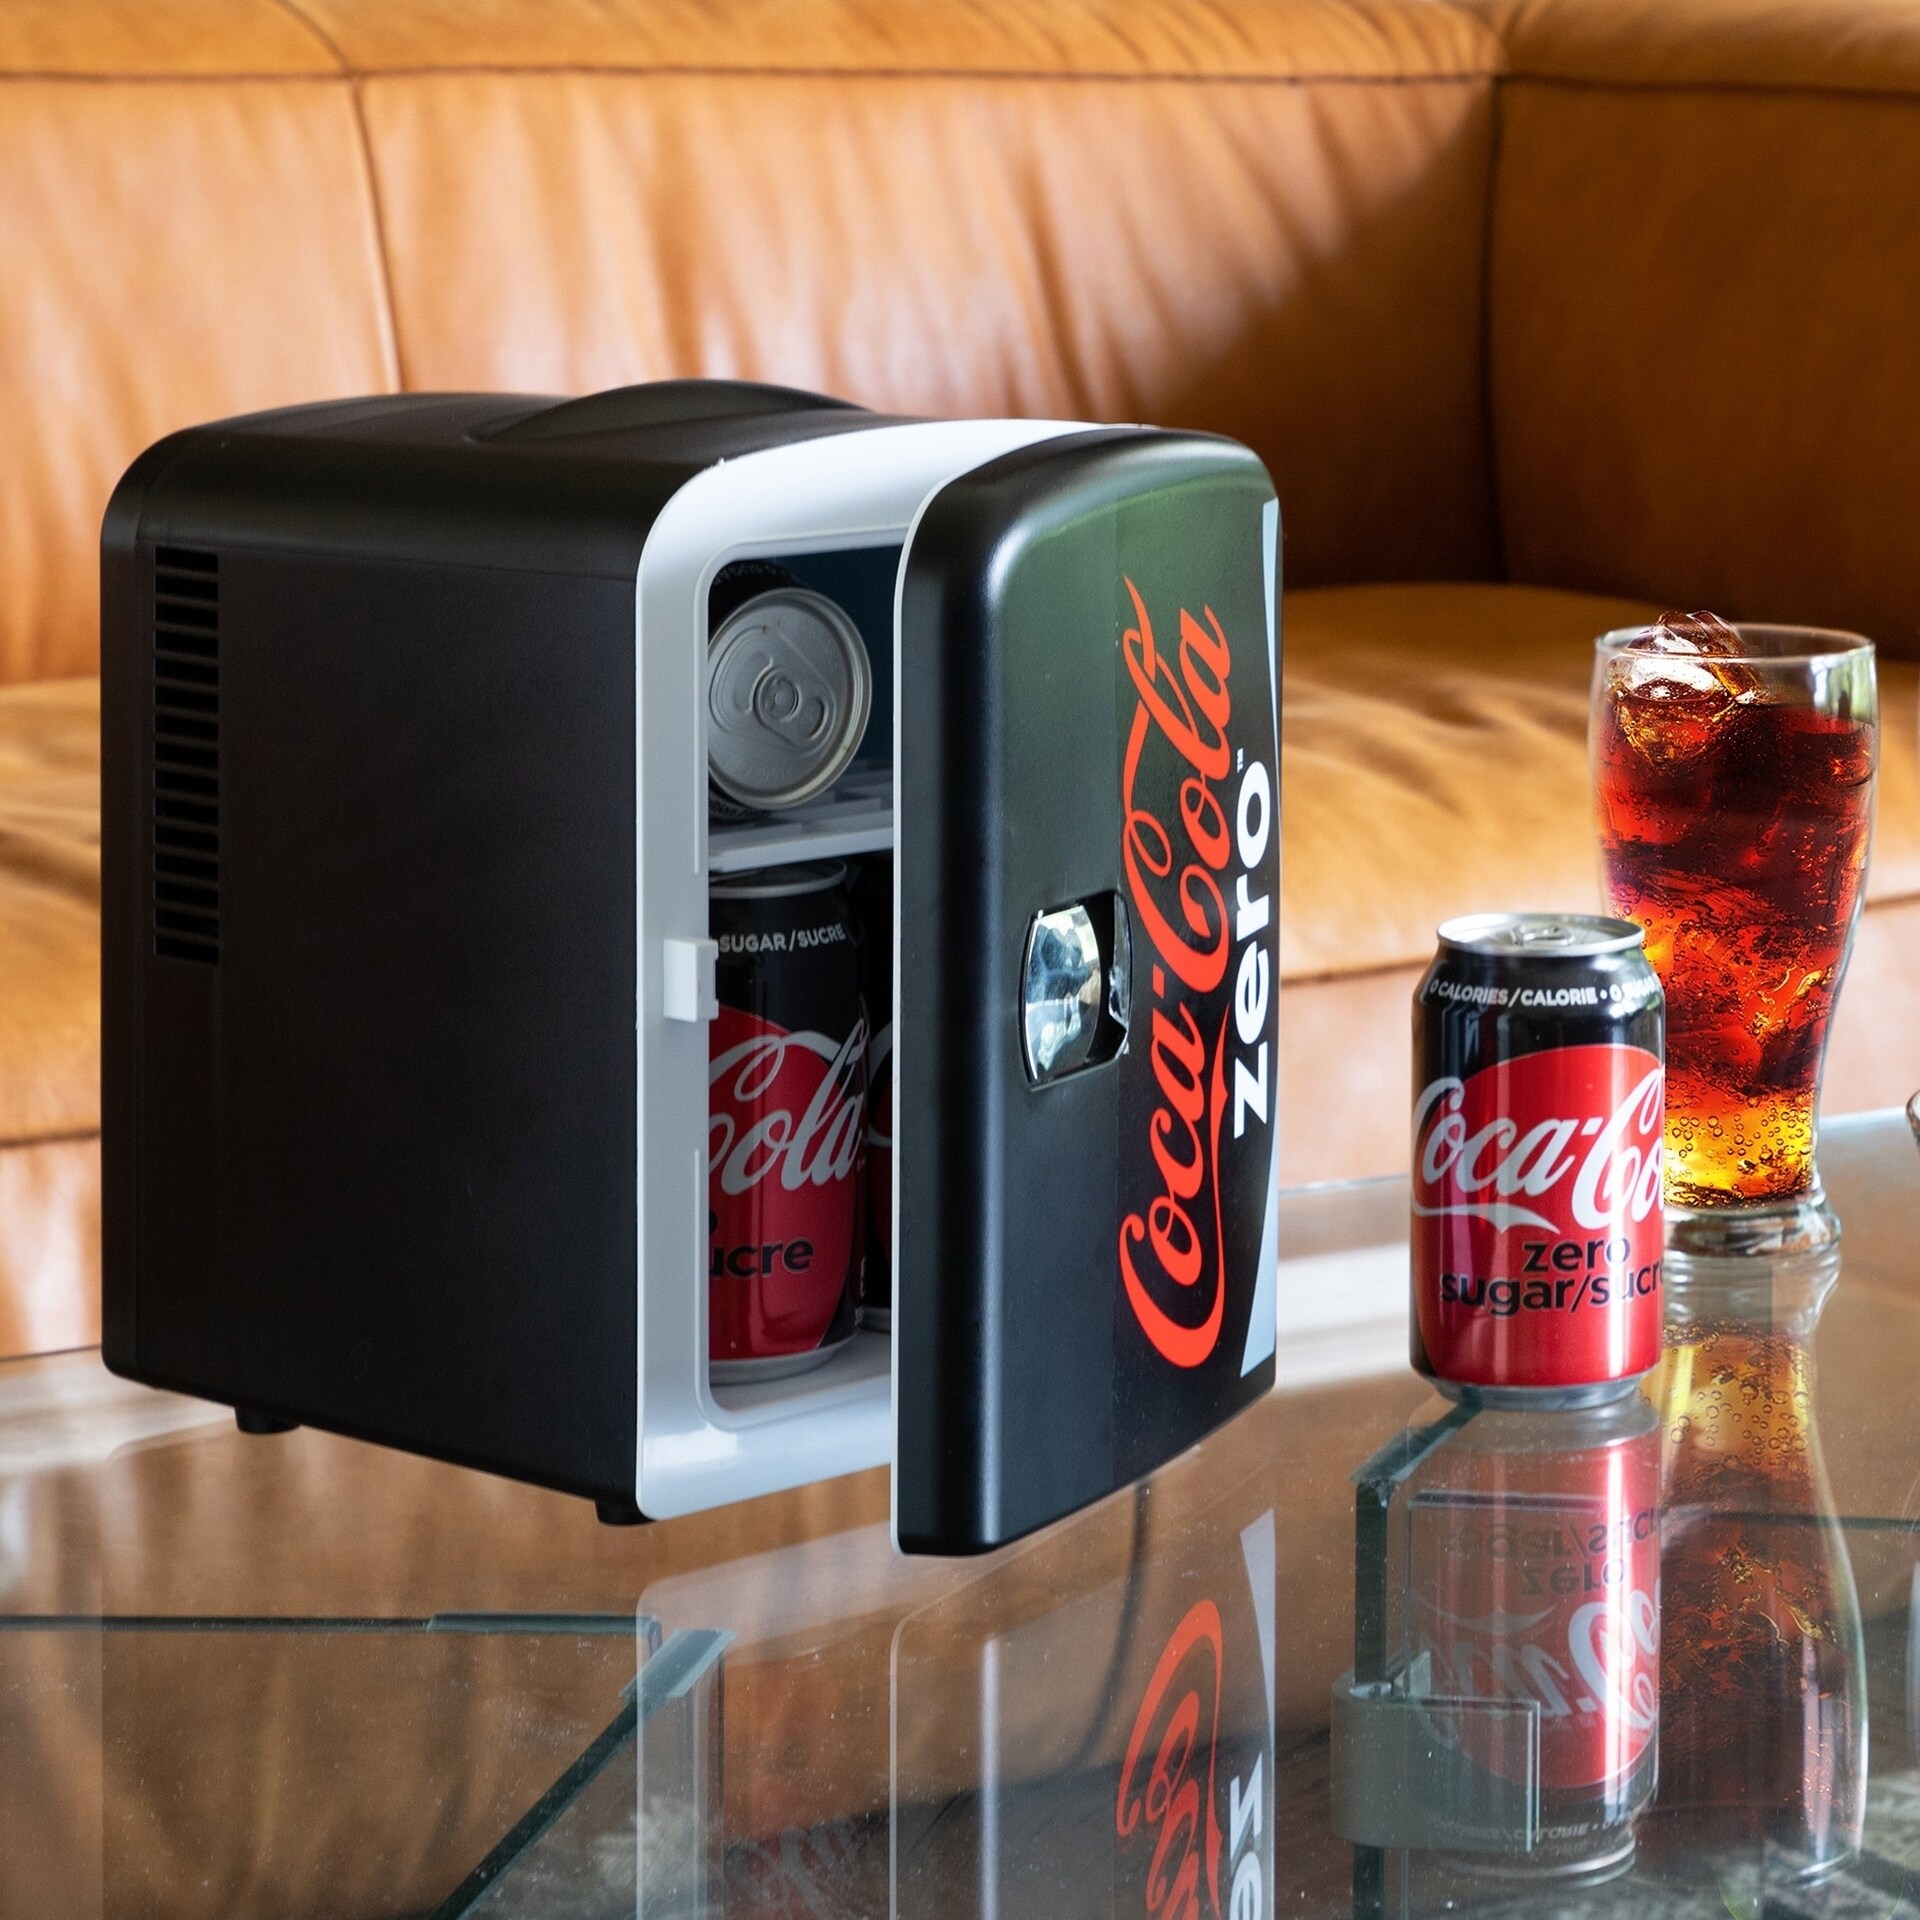 https://ak1.ostkcdn.com/images/products/is/images/direct/103df77a968f3b92de126c0b8ef3c9f0fd81f6bb/Coca-Cola-Fanta-Mini-Fridge-6-Can-AC-DC-Cooler-Warmer.jpg